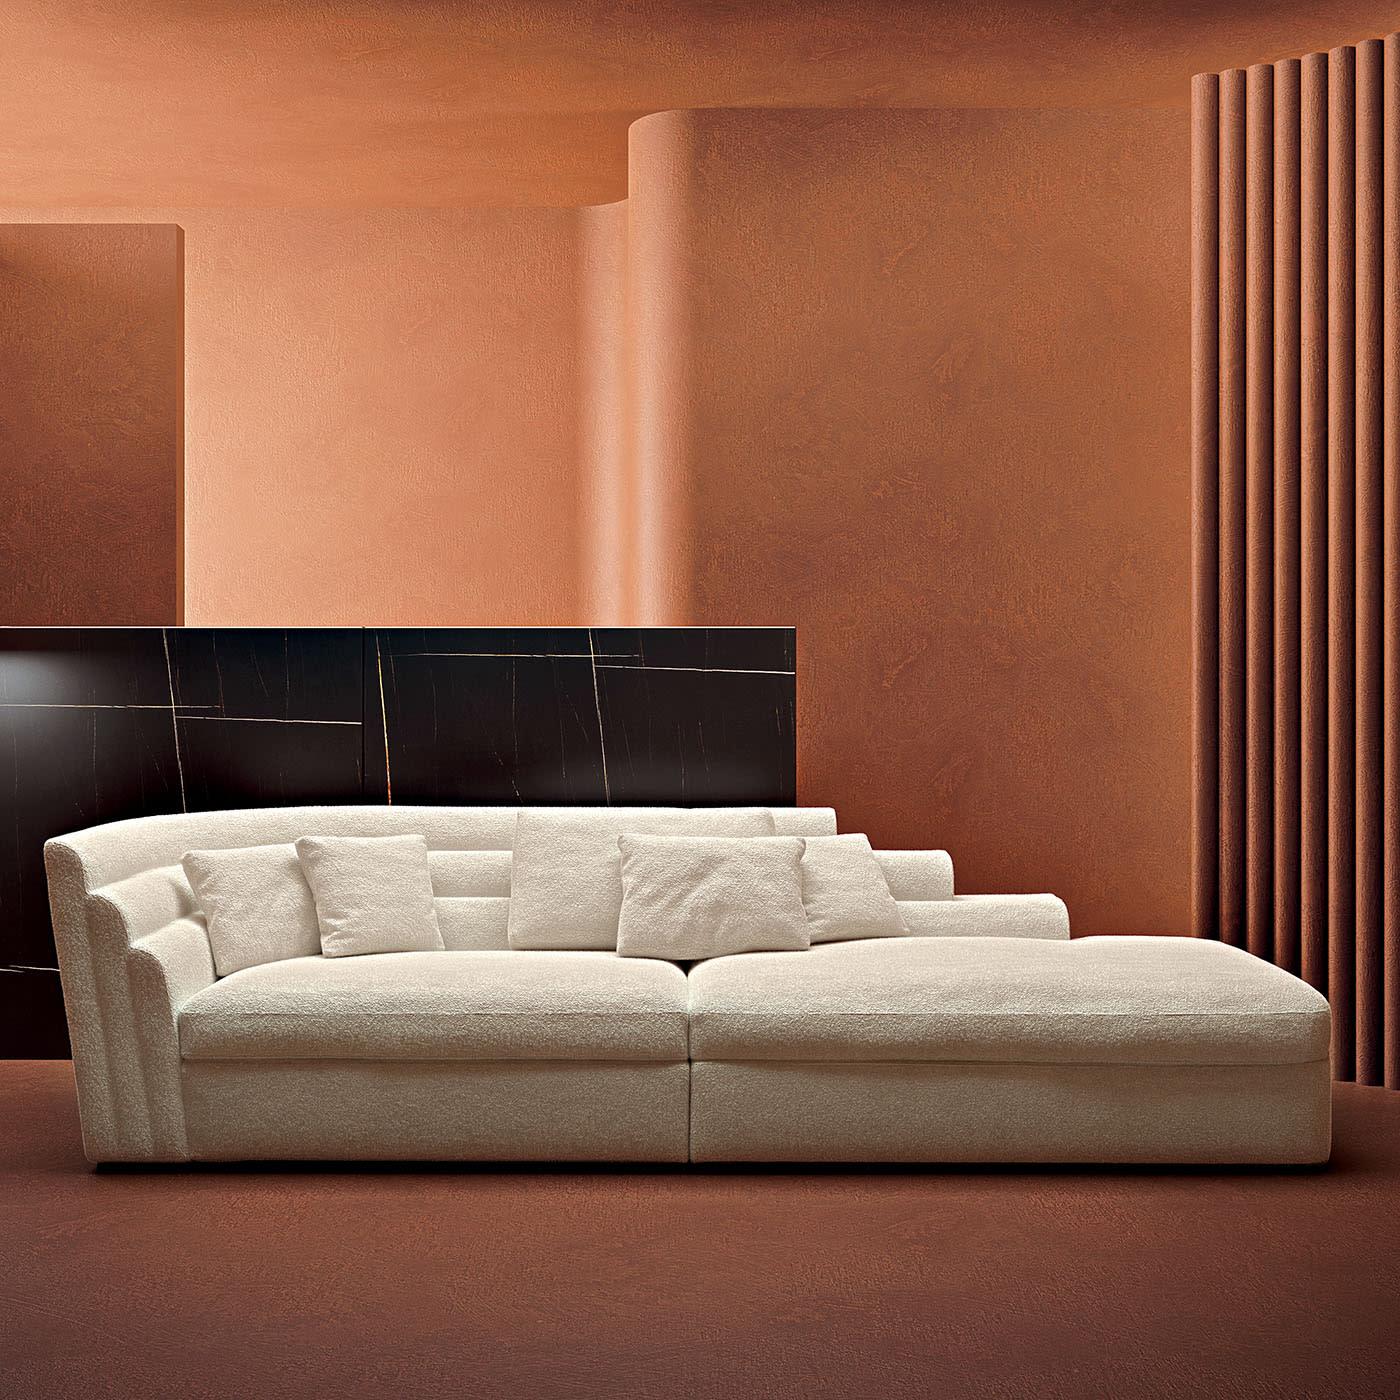 Sofa featuring an iconic design. With a system composed of single elements and various modular elements and a structure in wood covered with a layer of polyurethane of different densities. The maximum comfort of the seat is determined by a weave of